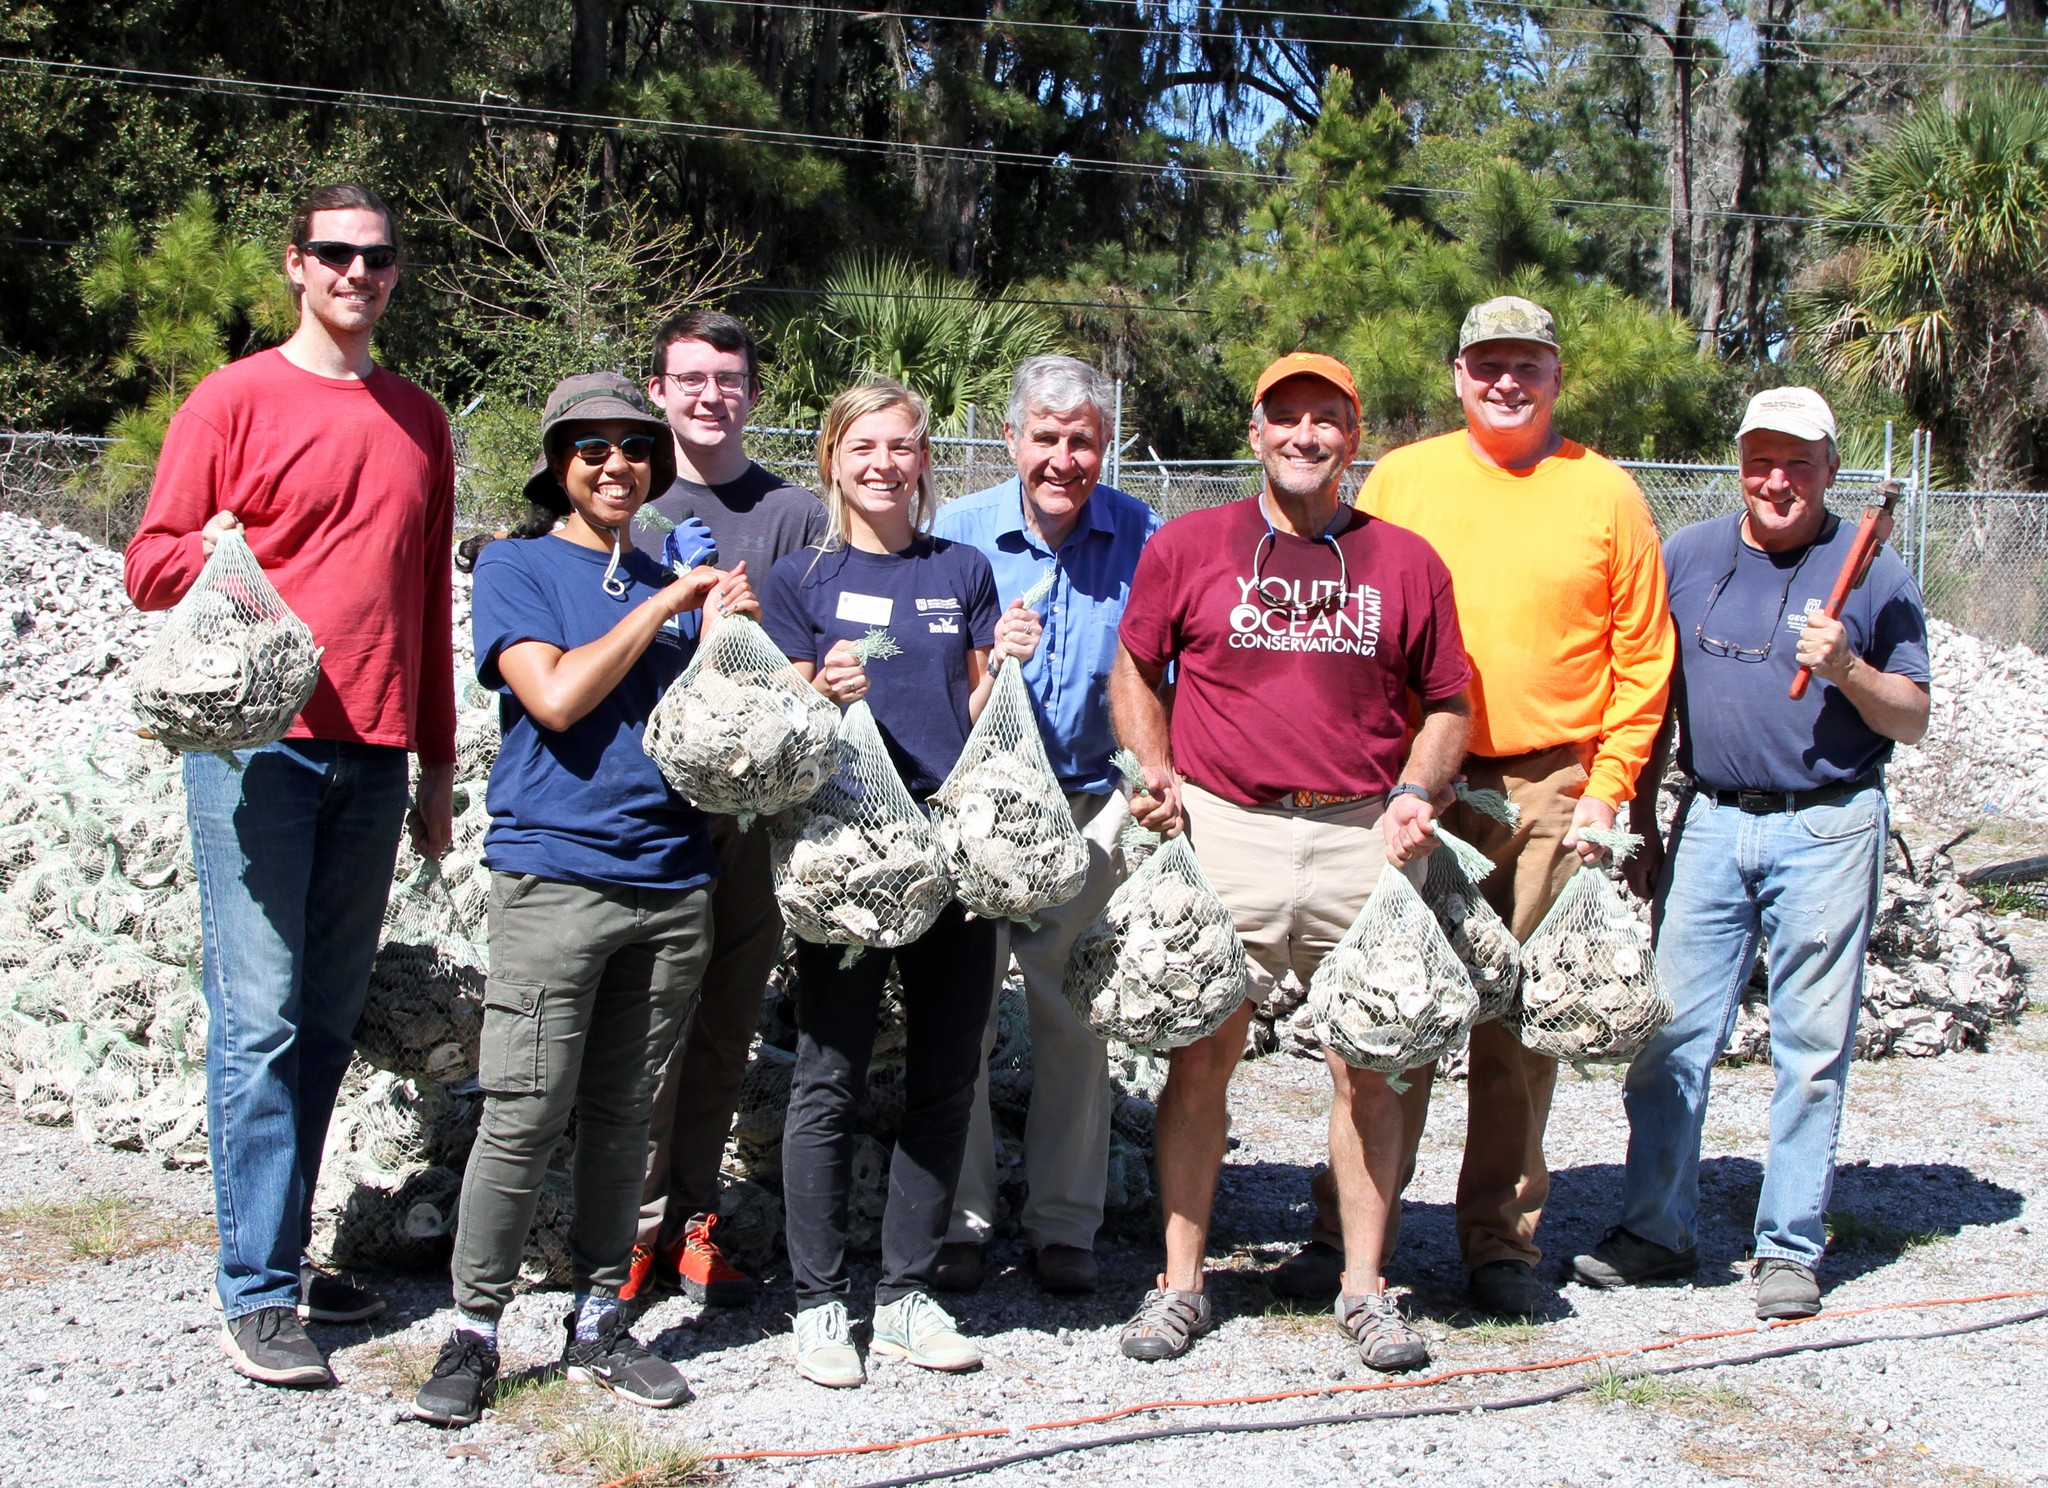 A group poses with bagged oyster shells